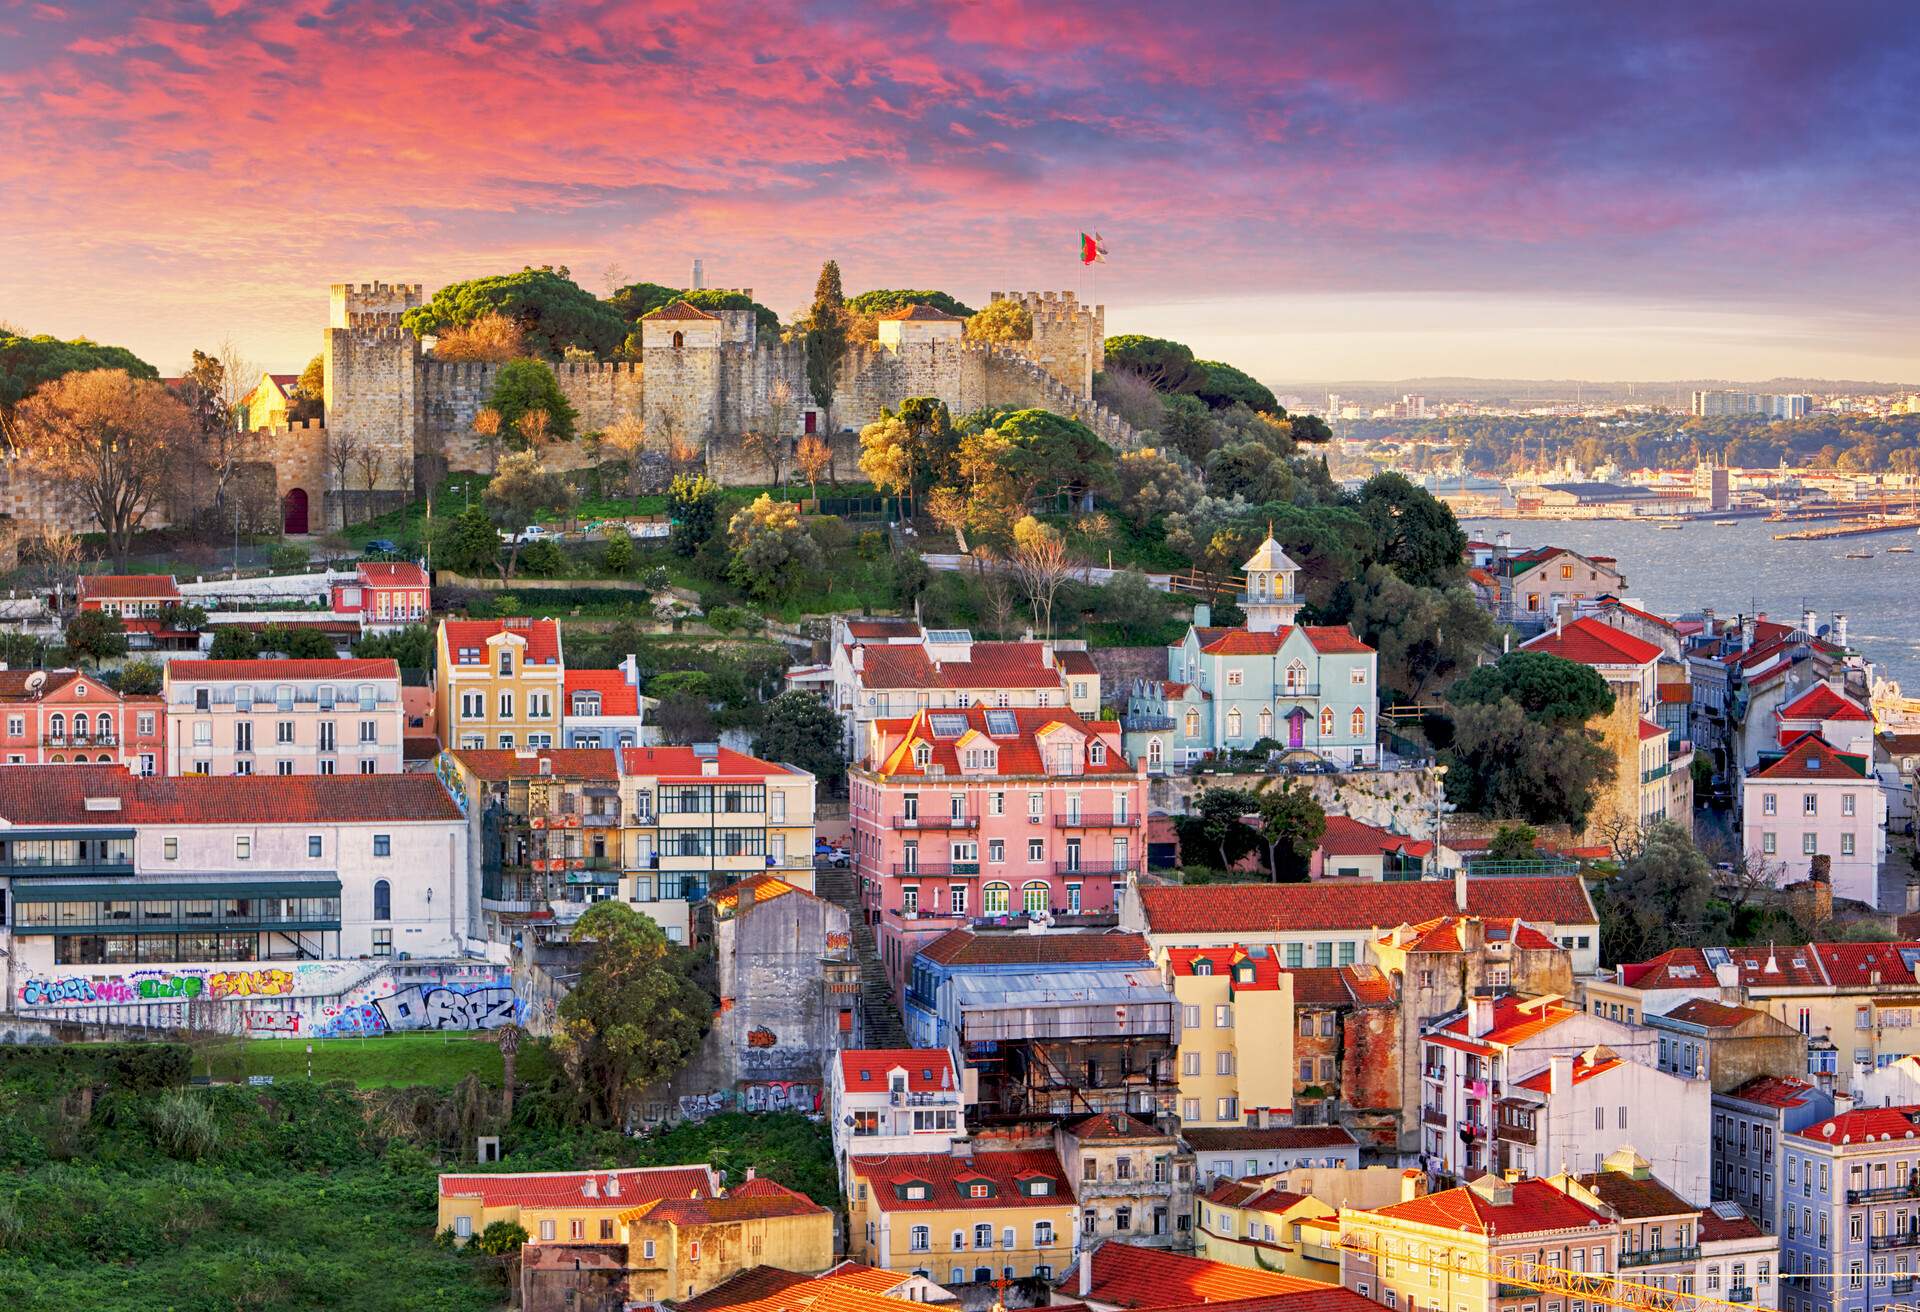 São Jorge Castle is a fortified castle perched on a forested hill surrounded by colourful buildings in a coastal city.